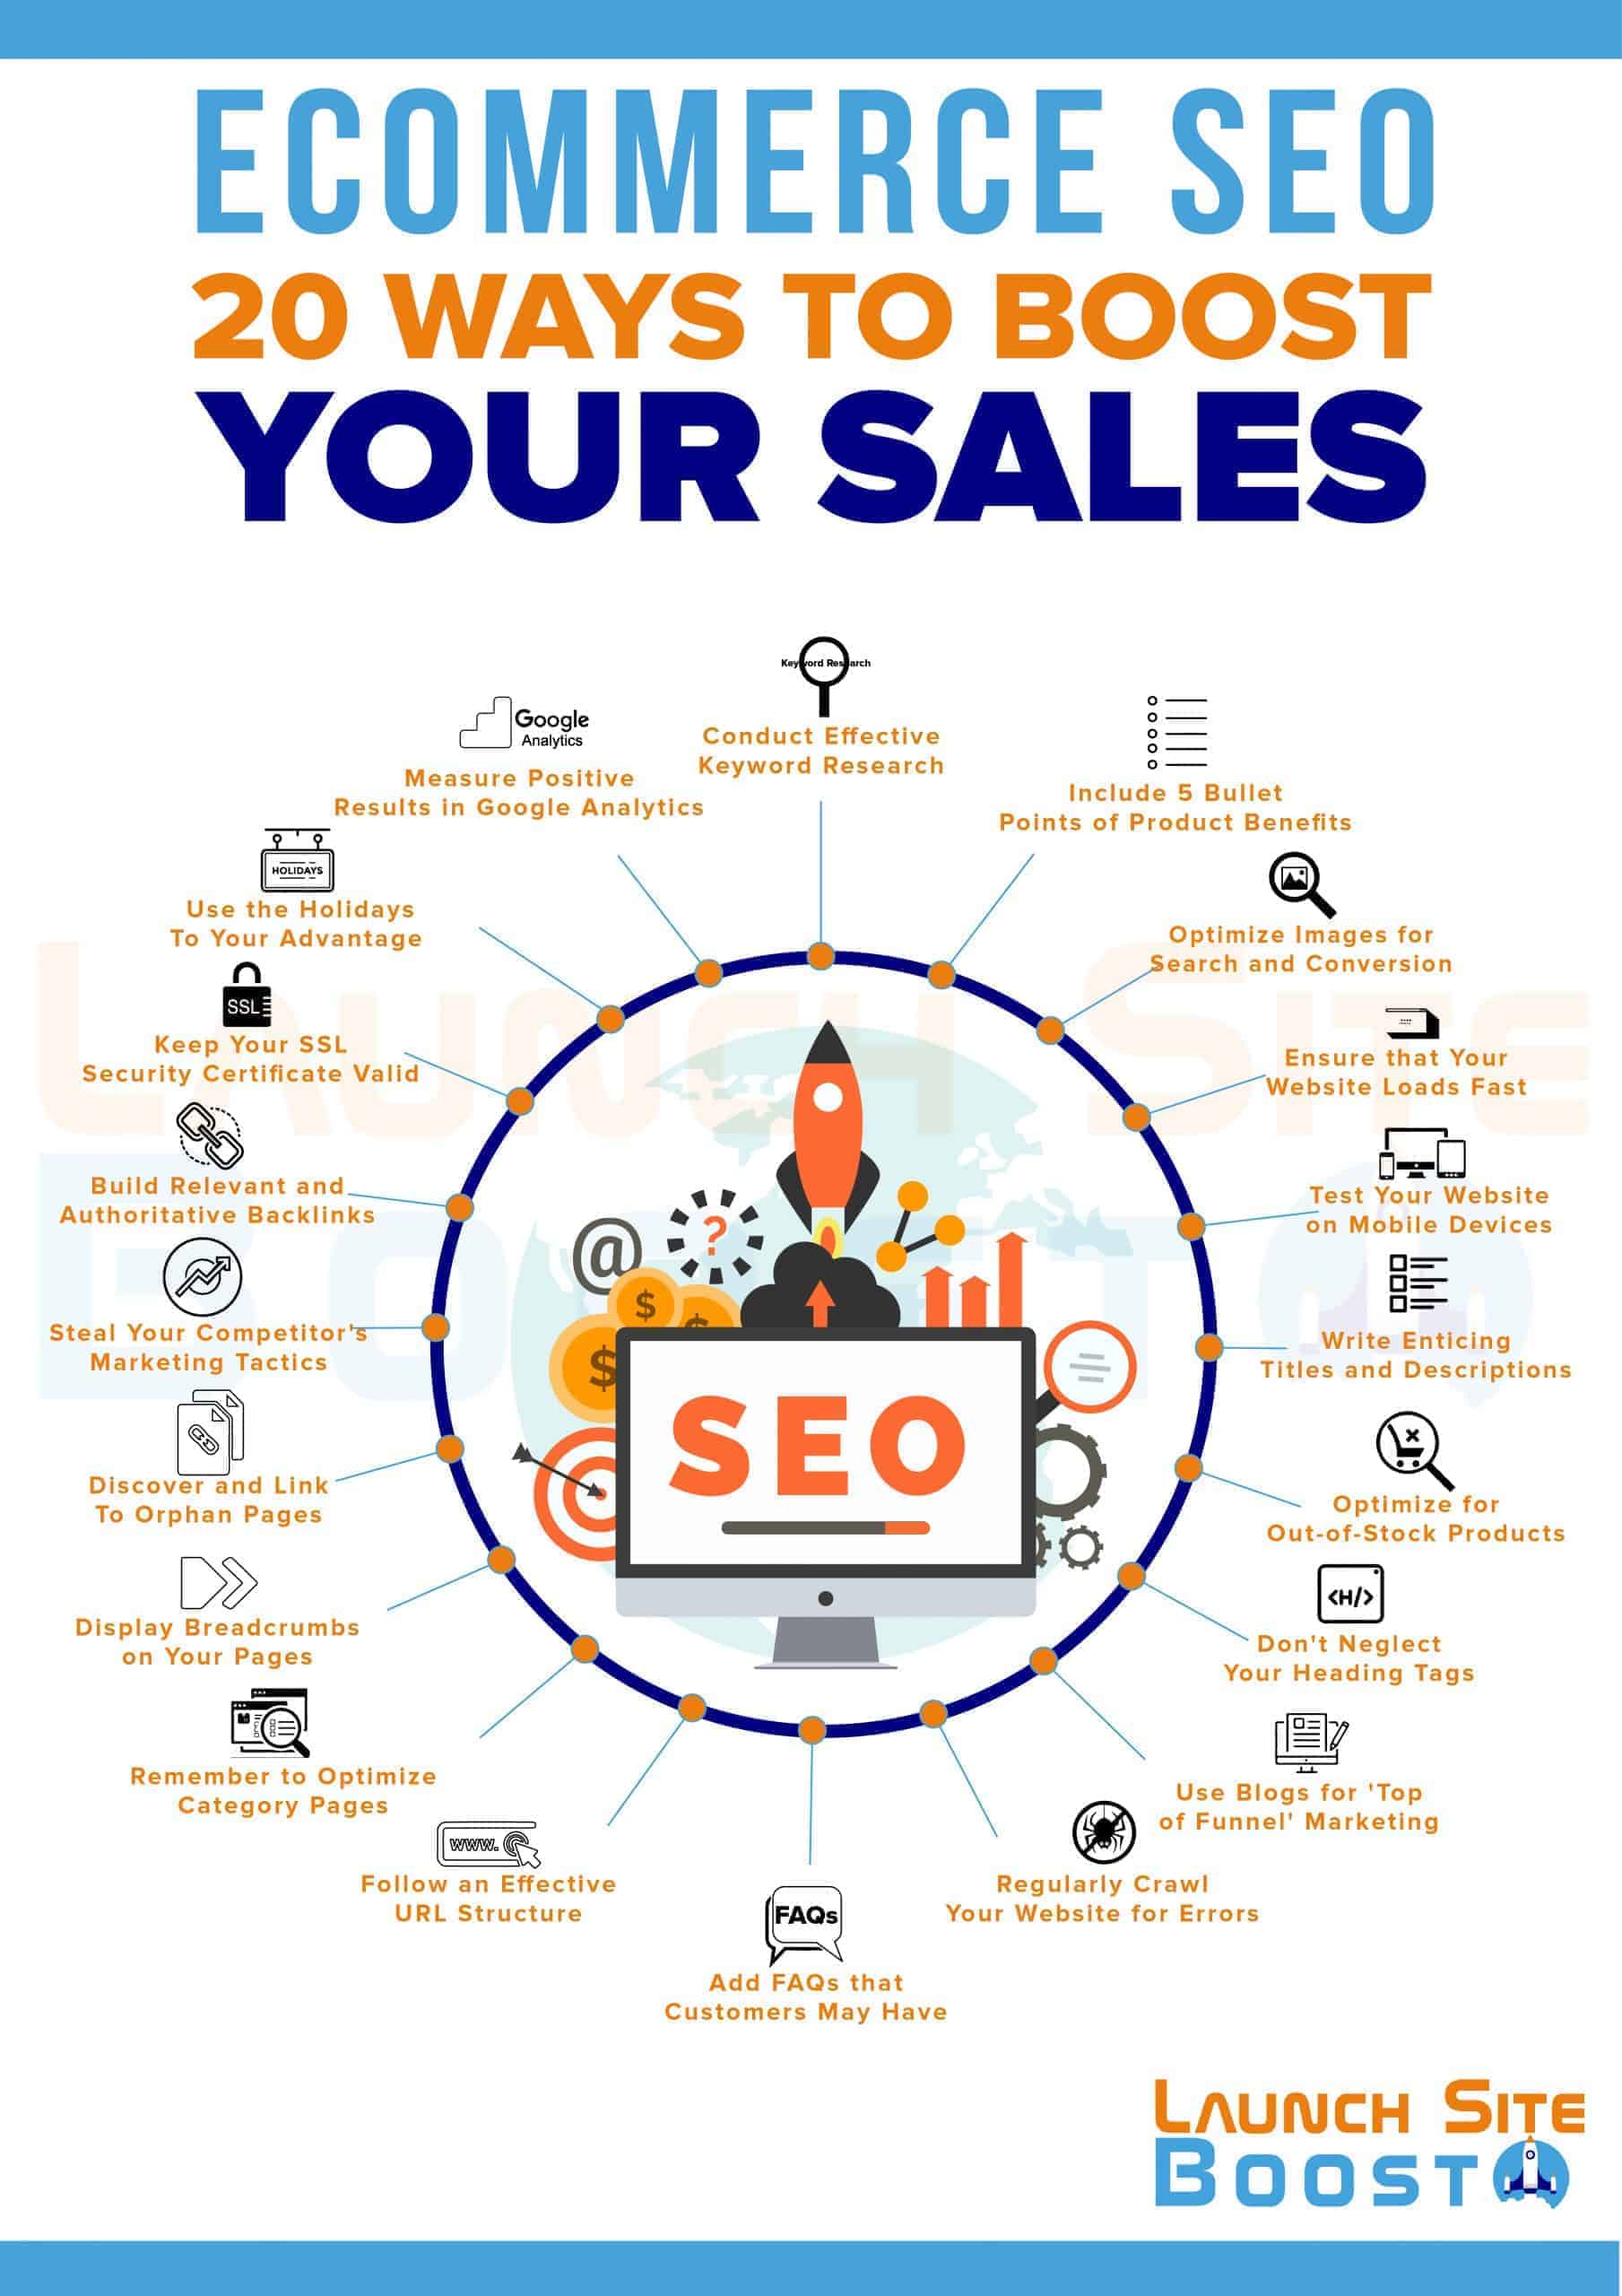 eCommerce SEO - 20 Ways to Boost Your Sales - [INFOGRAPHIC]